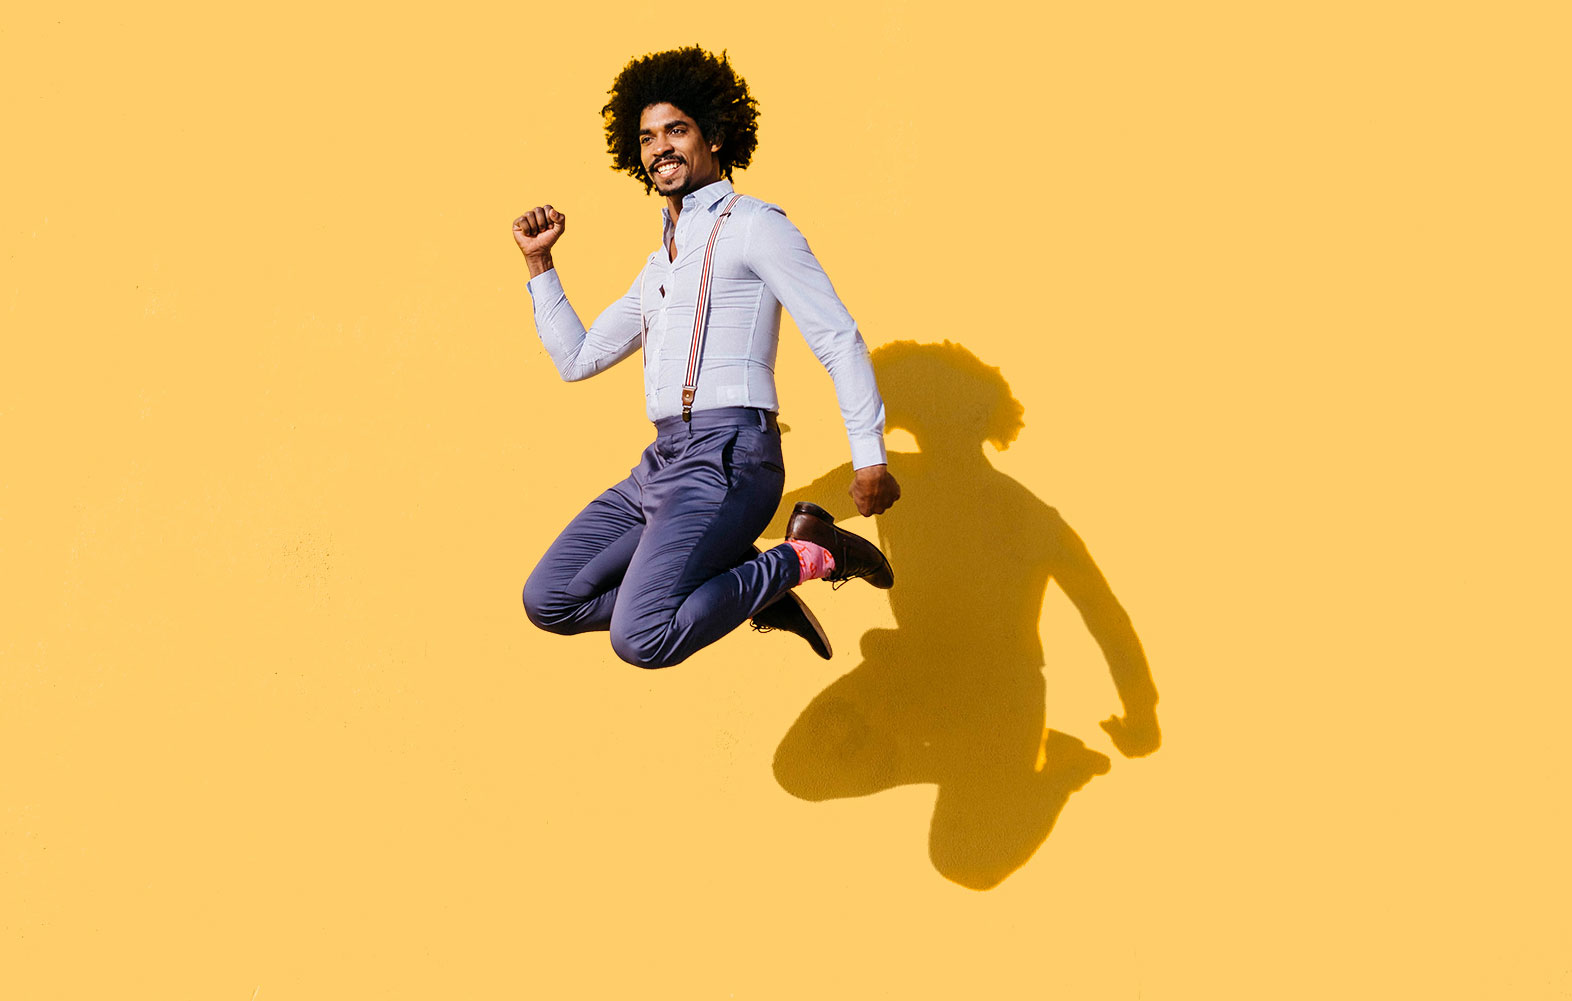 A man in suspenders jumping in the air behind a yellow background